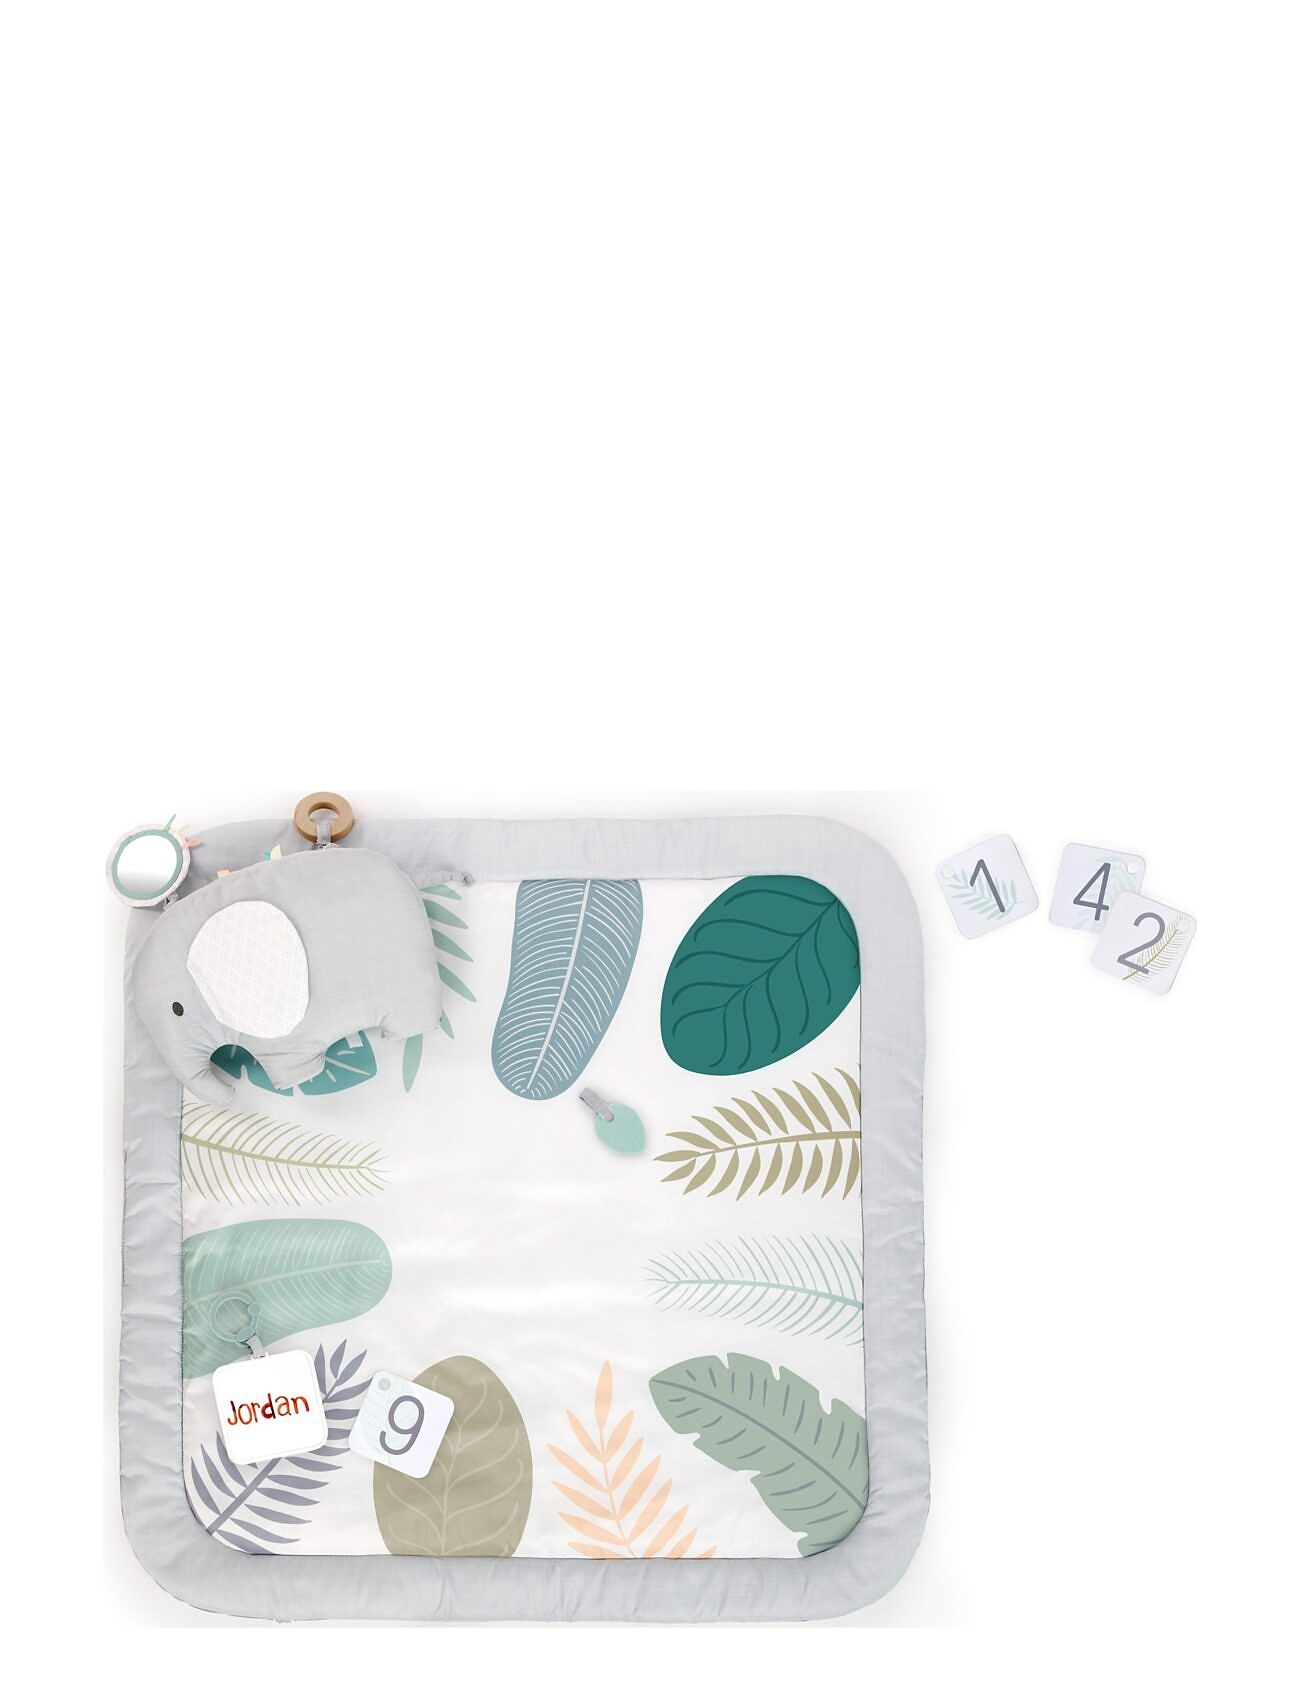 Sprout Spot™ Baby Milest Play Mat Baby & Maternity Baby Sleep Play Mats Multi/patterned Ingenuity